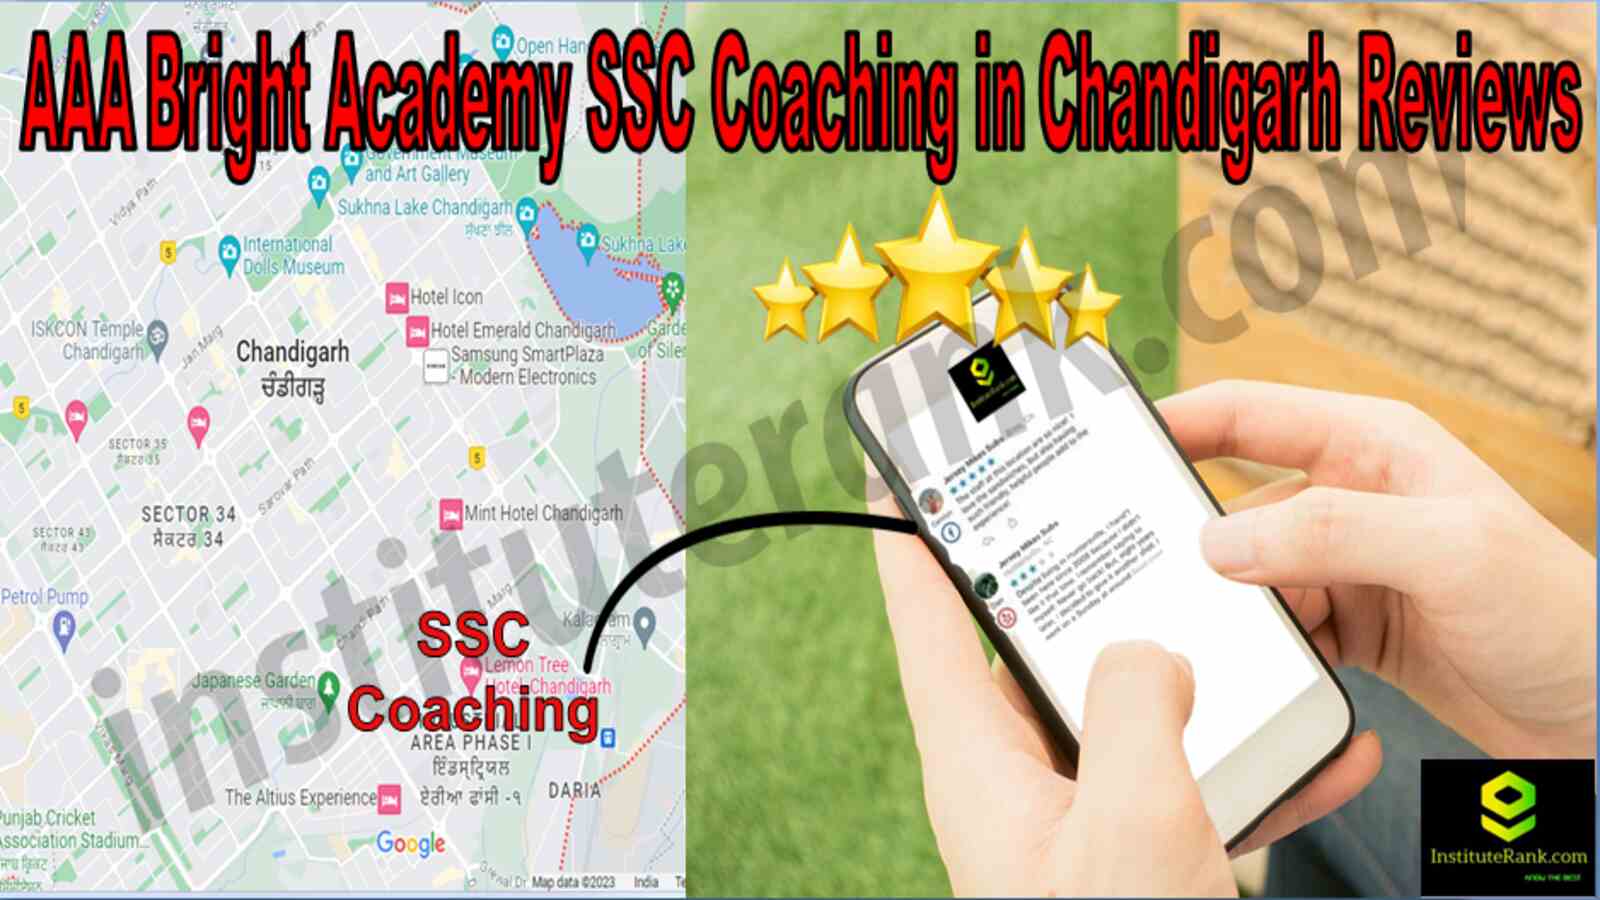 AAA Bright Academy SSC Coaching in Chandigarh Reviews